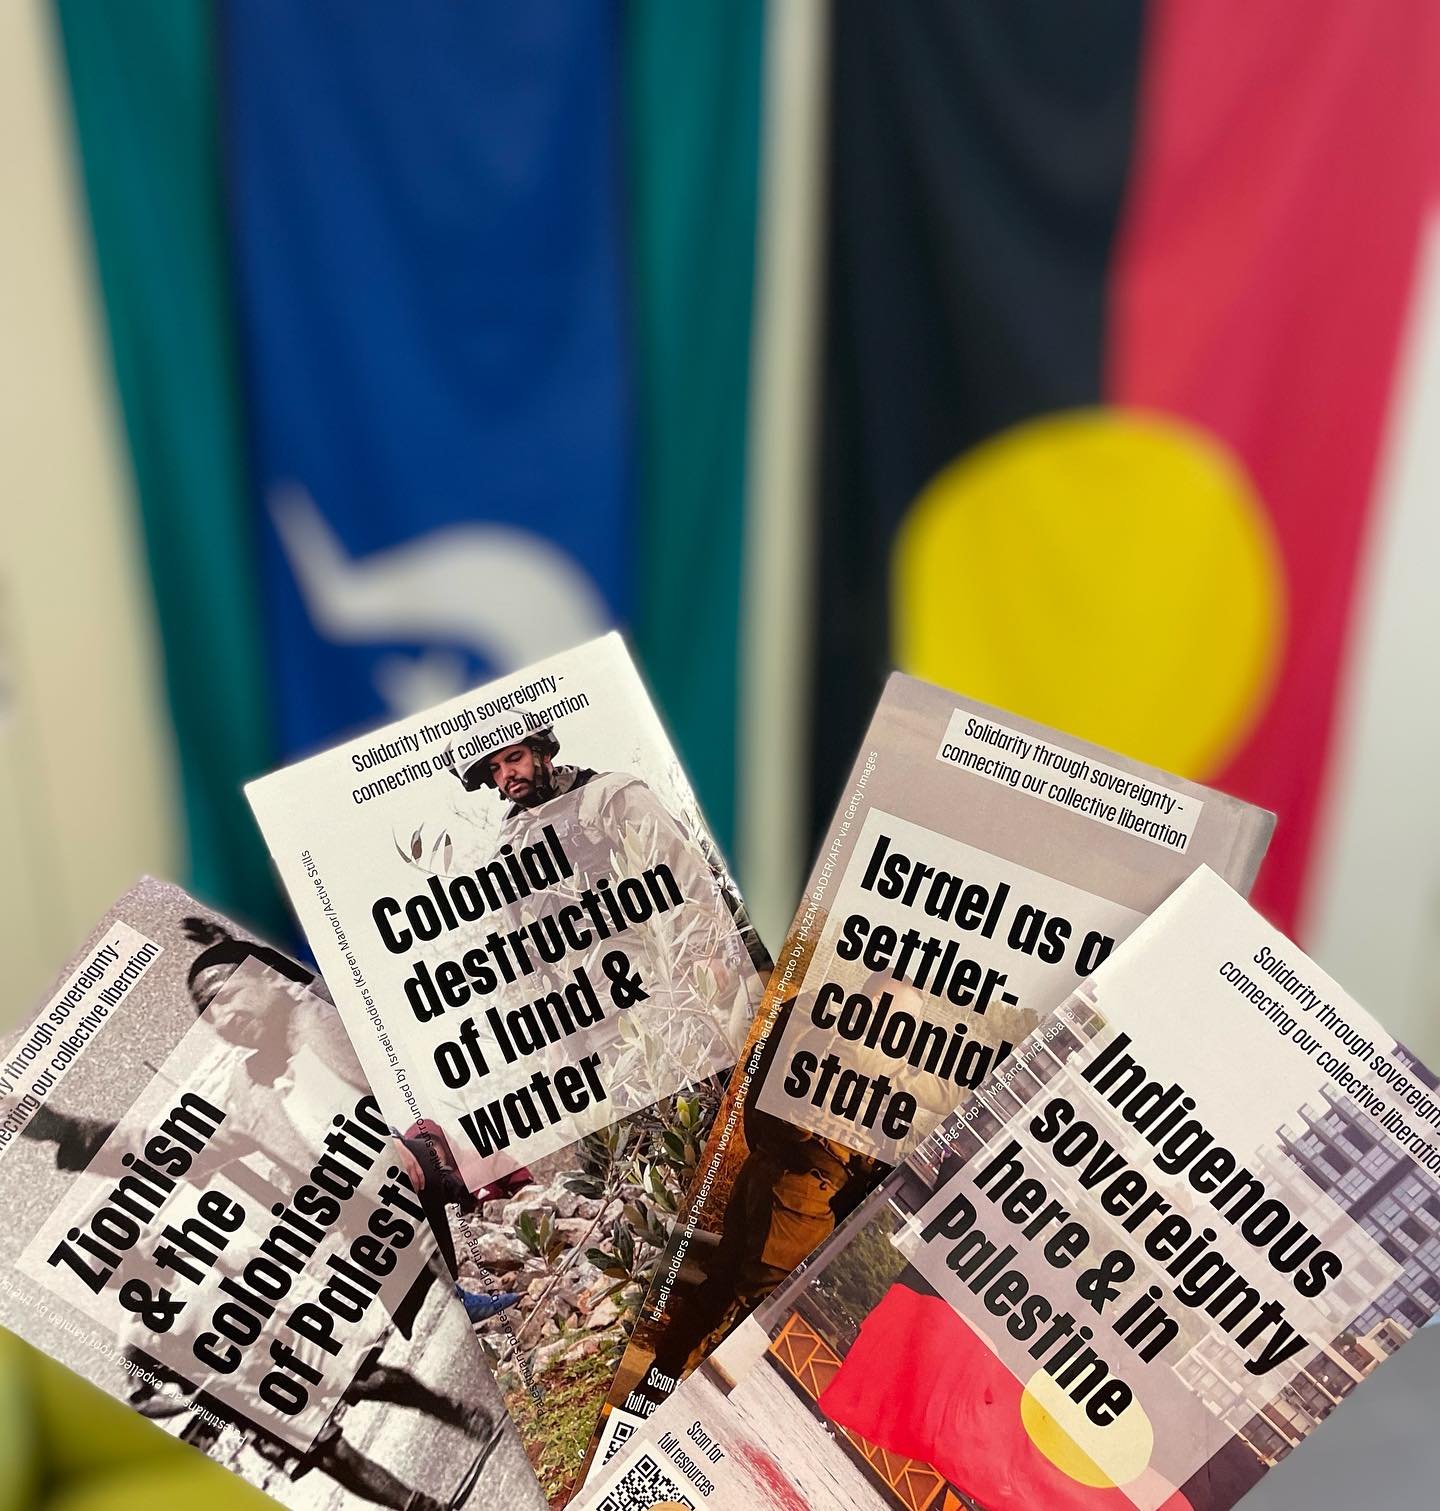 Keep an eye out for the printed copies of our &lsquo;solidarity through sovereignty&rsquo; series. We&rsquo;ll be sharing them with community &amp; activist groups throughout Magandjin this weekend &hearts;️💛🖤🍉